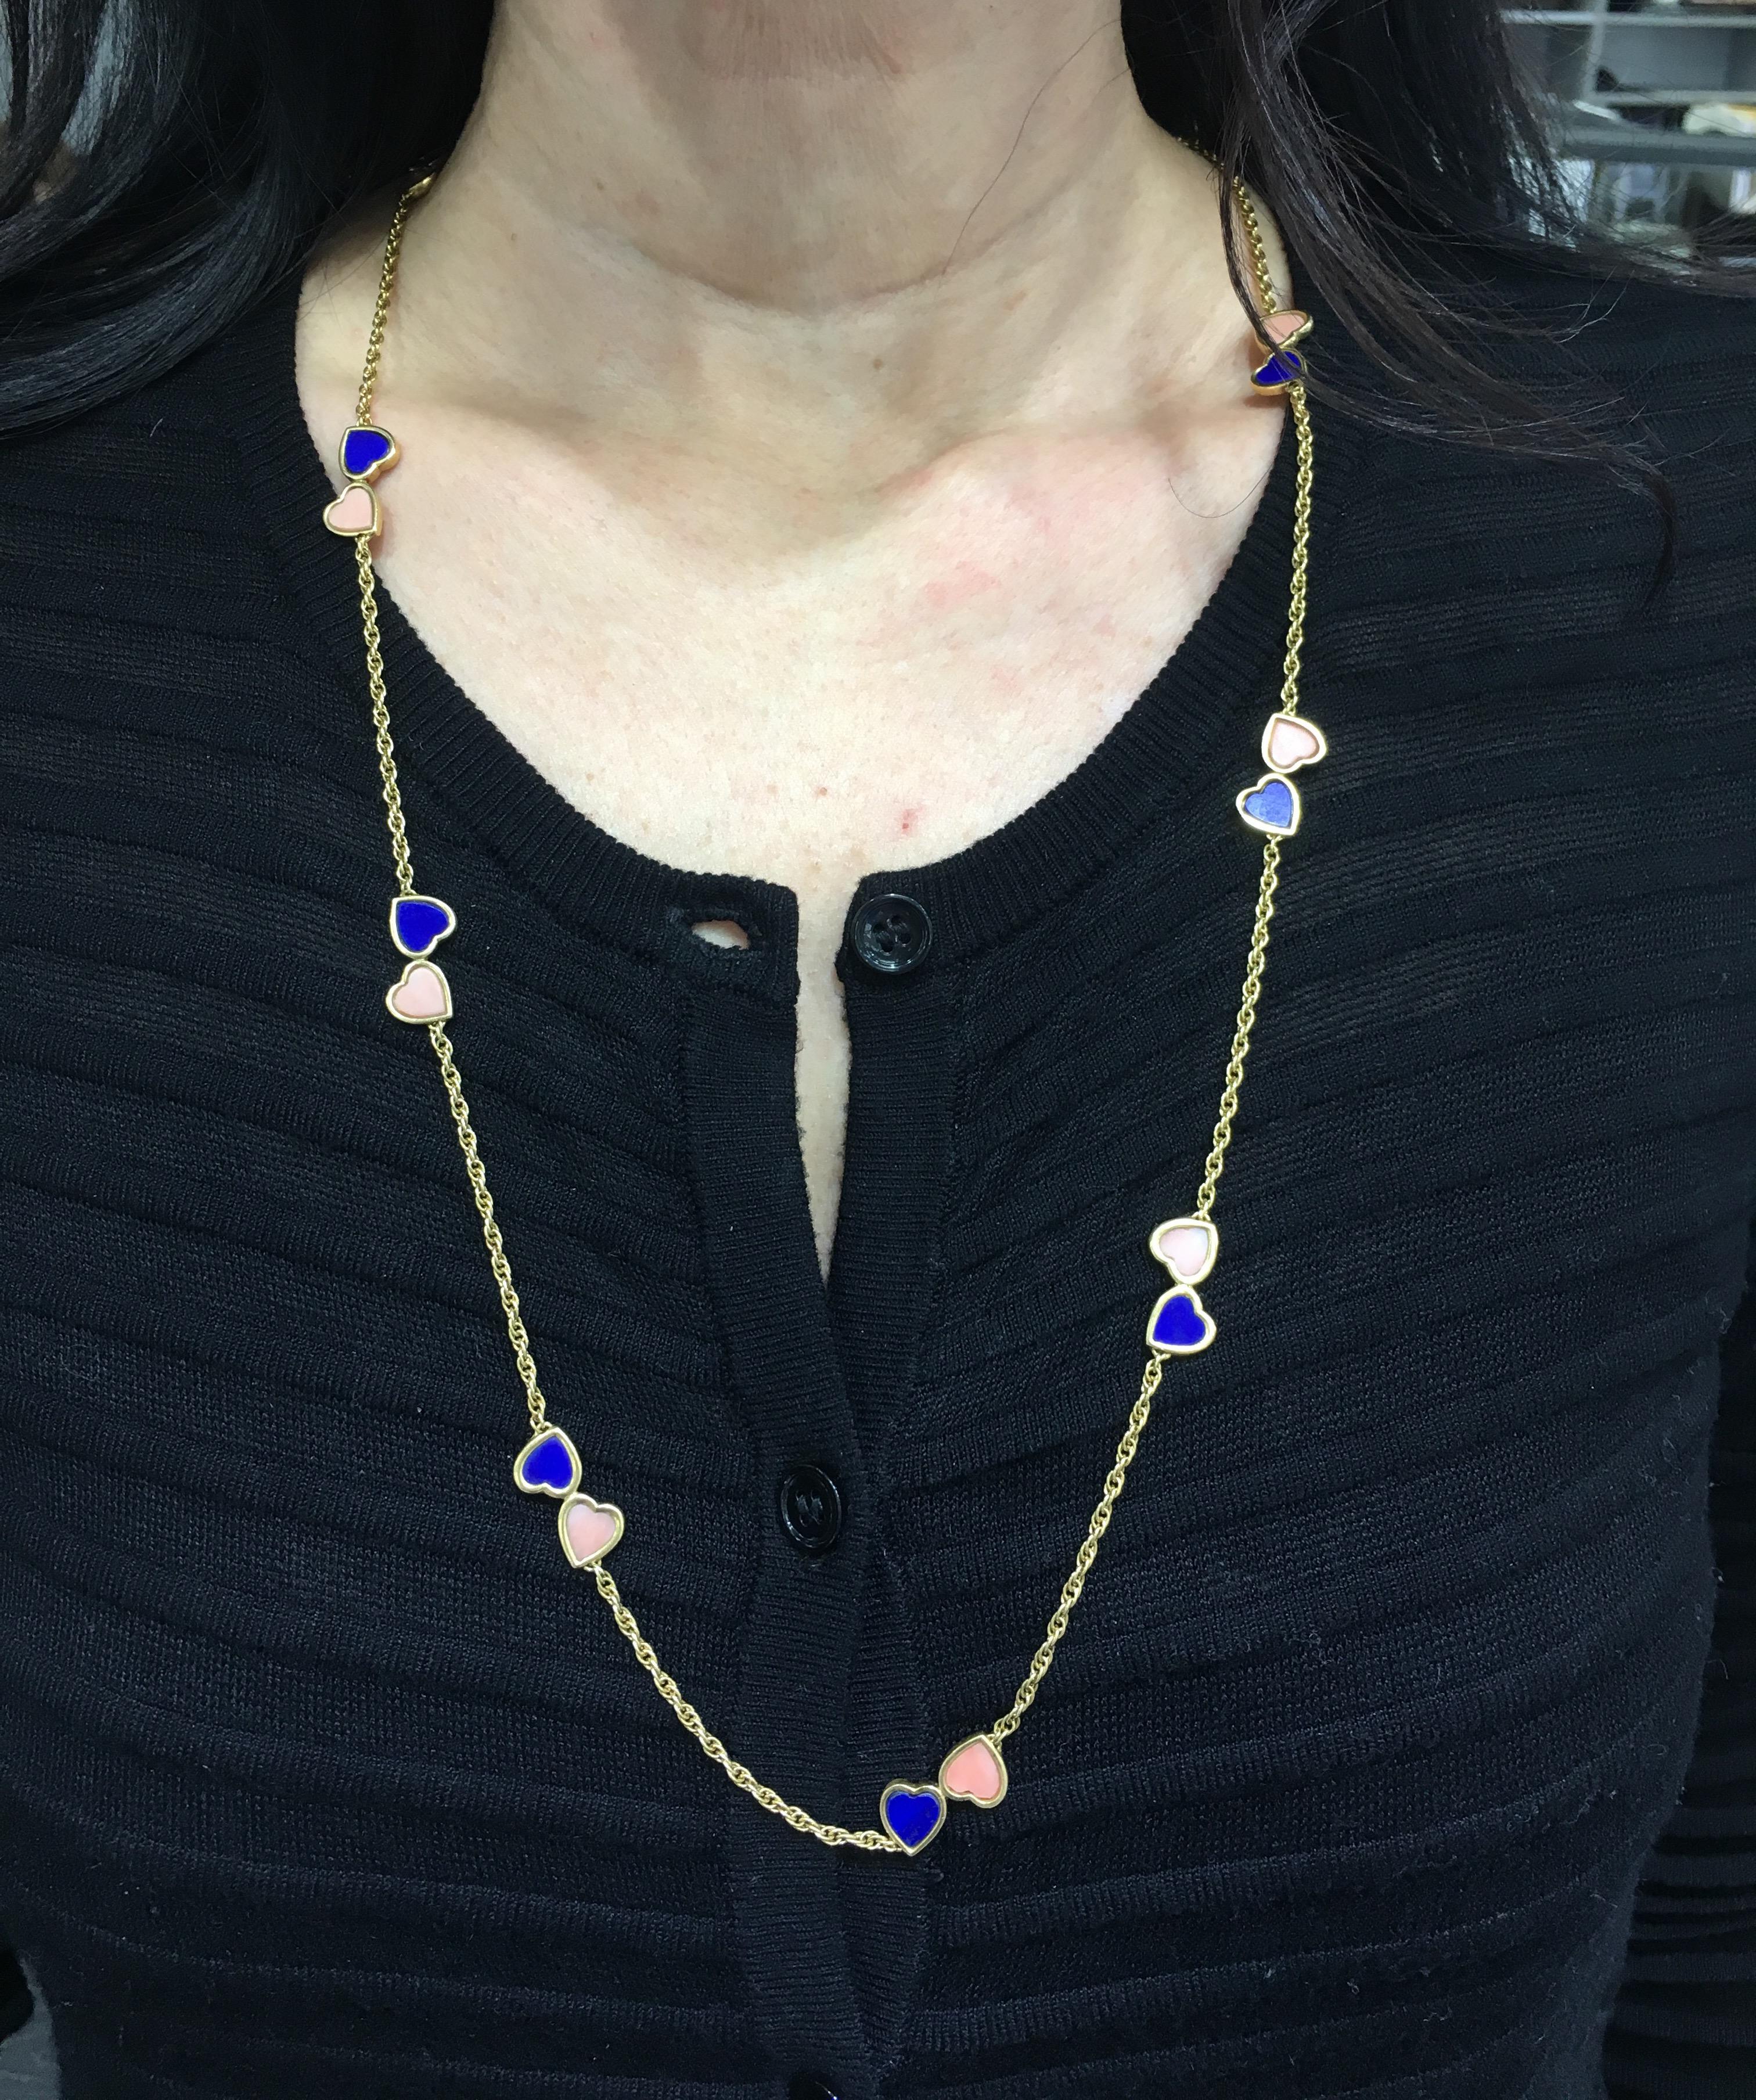 Women's Van Cleef & Arpels Lapis and Coral Double Heart Necklace